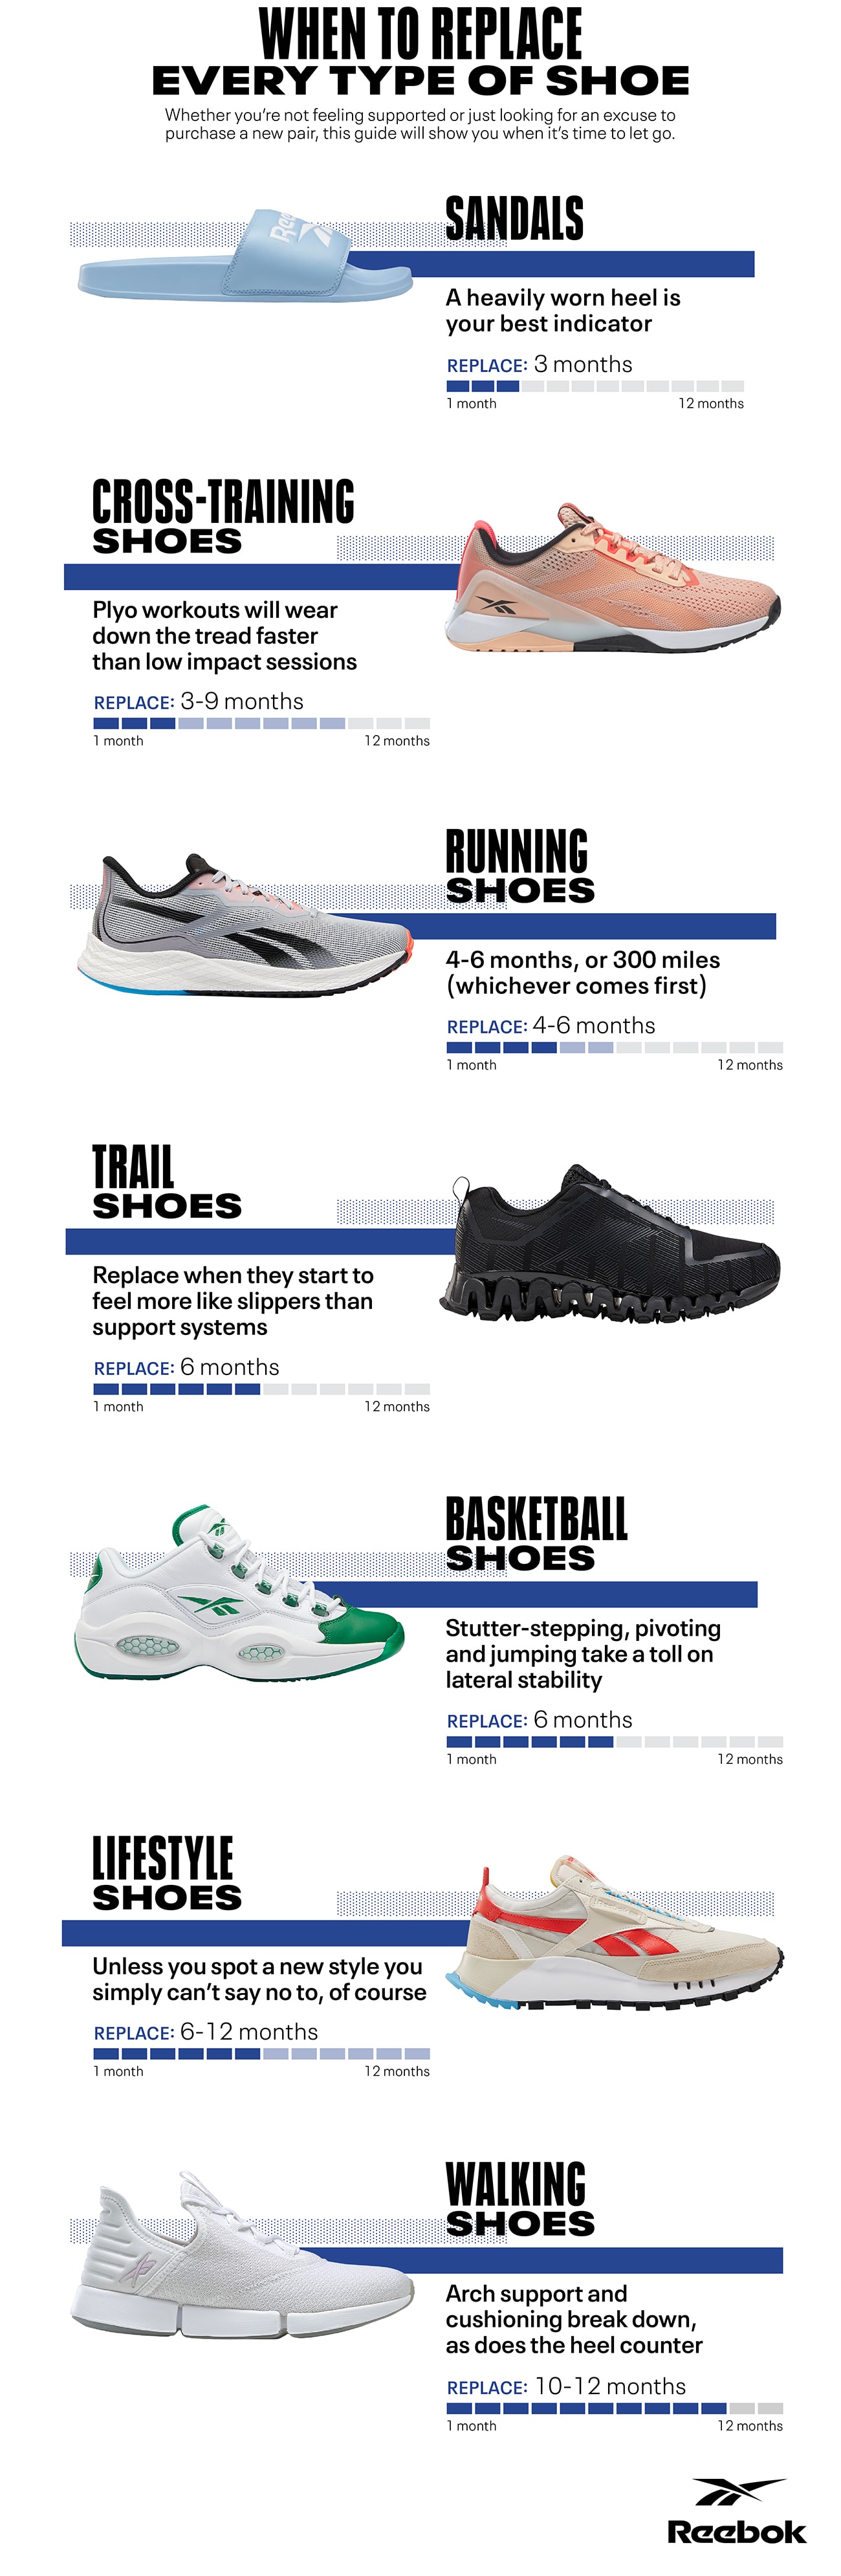 When to Replace Every Type of Shoe_rev